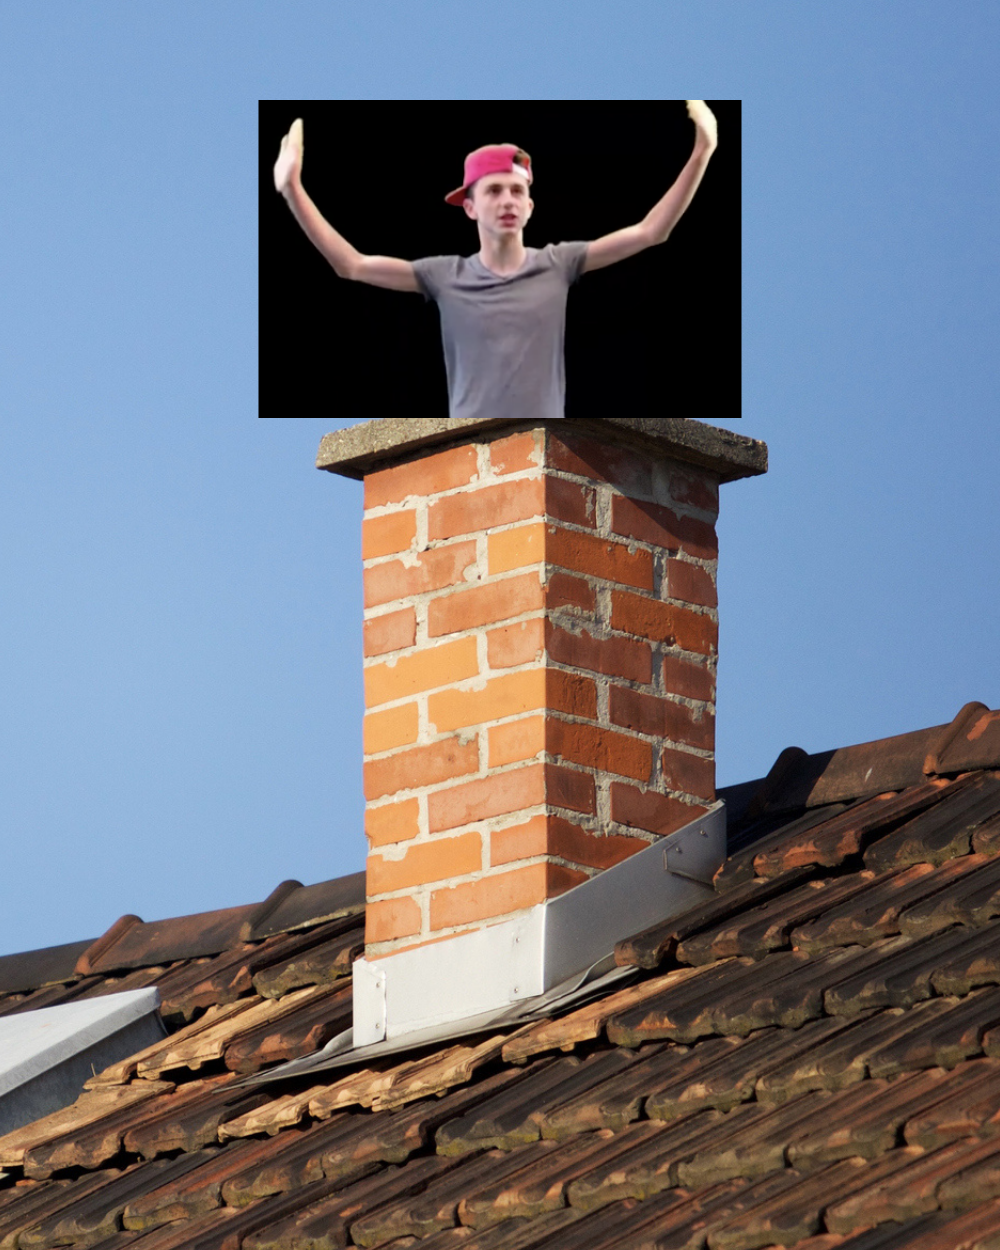 A photo of rapping Lil&#x27; TImmy Tim emerging from a chimney